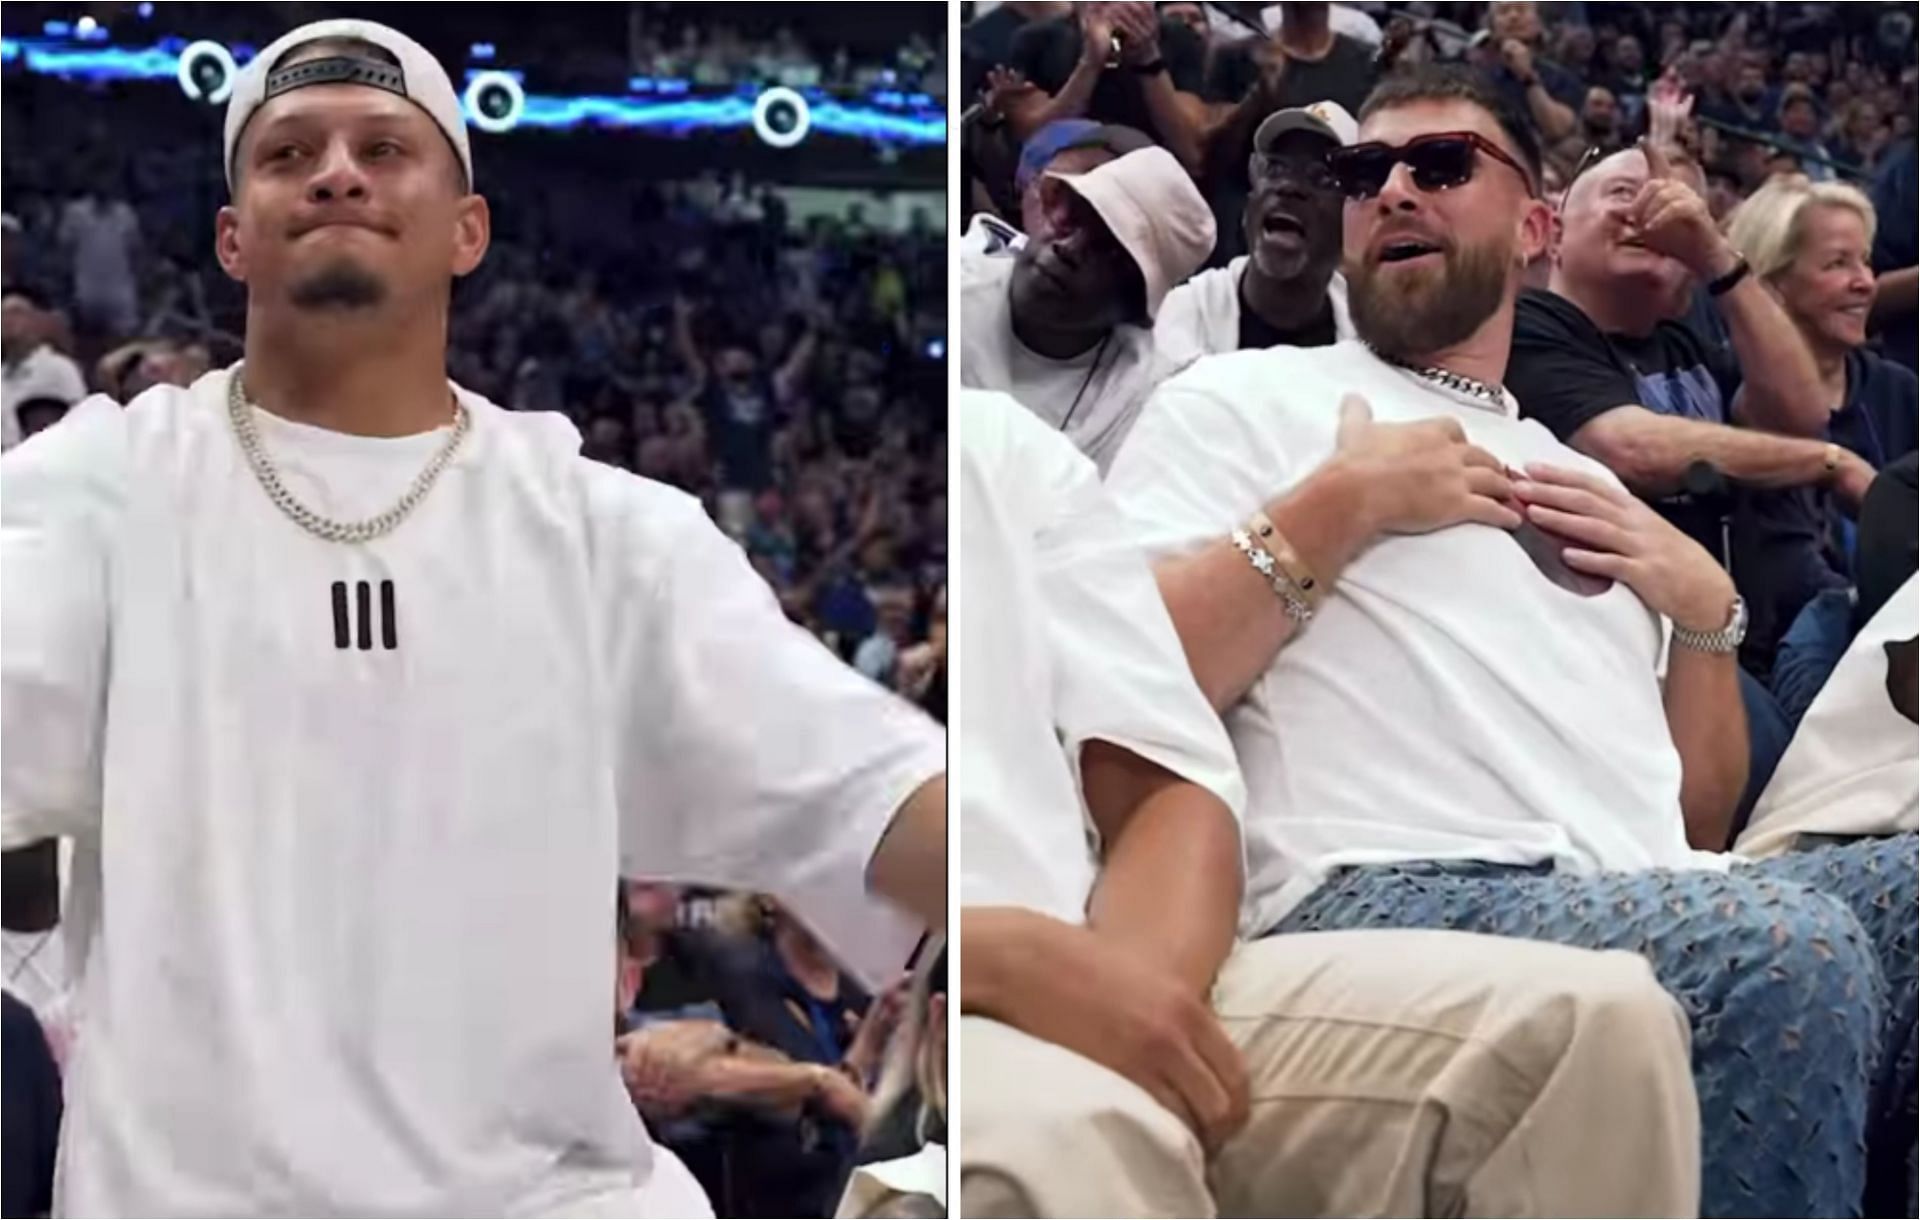 Fans go berserk for Patrick Mahomes but boo Travis Kelce as stars show up for Game 3 between Mavericks and Timberwolves